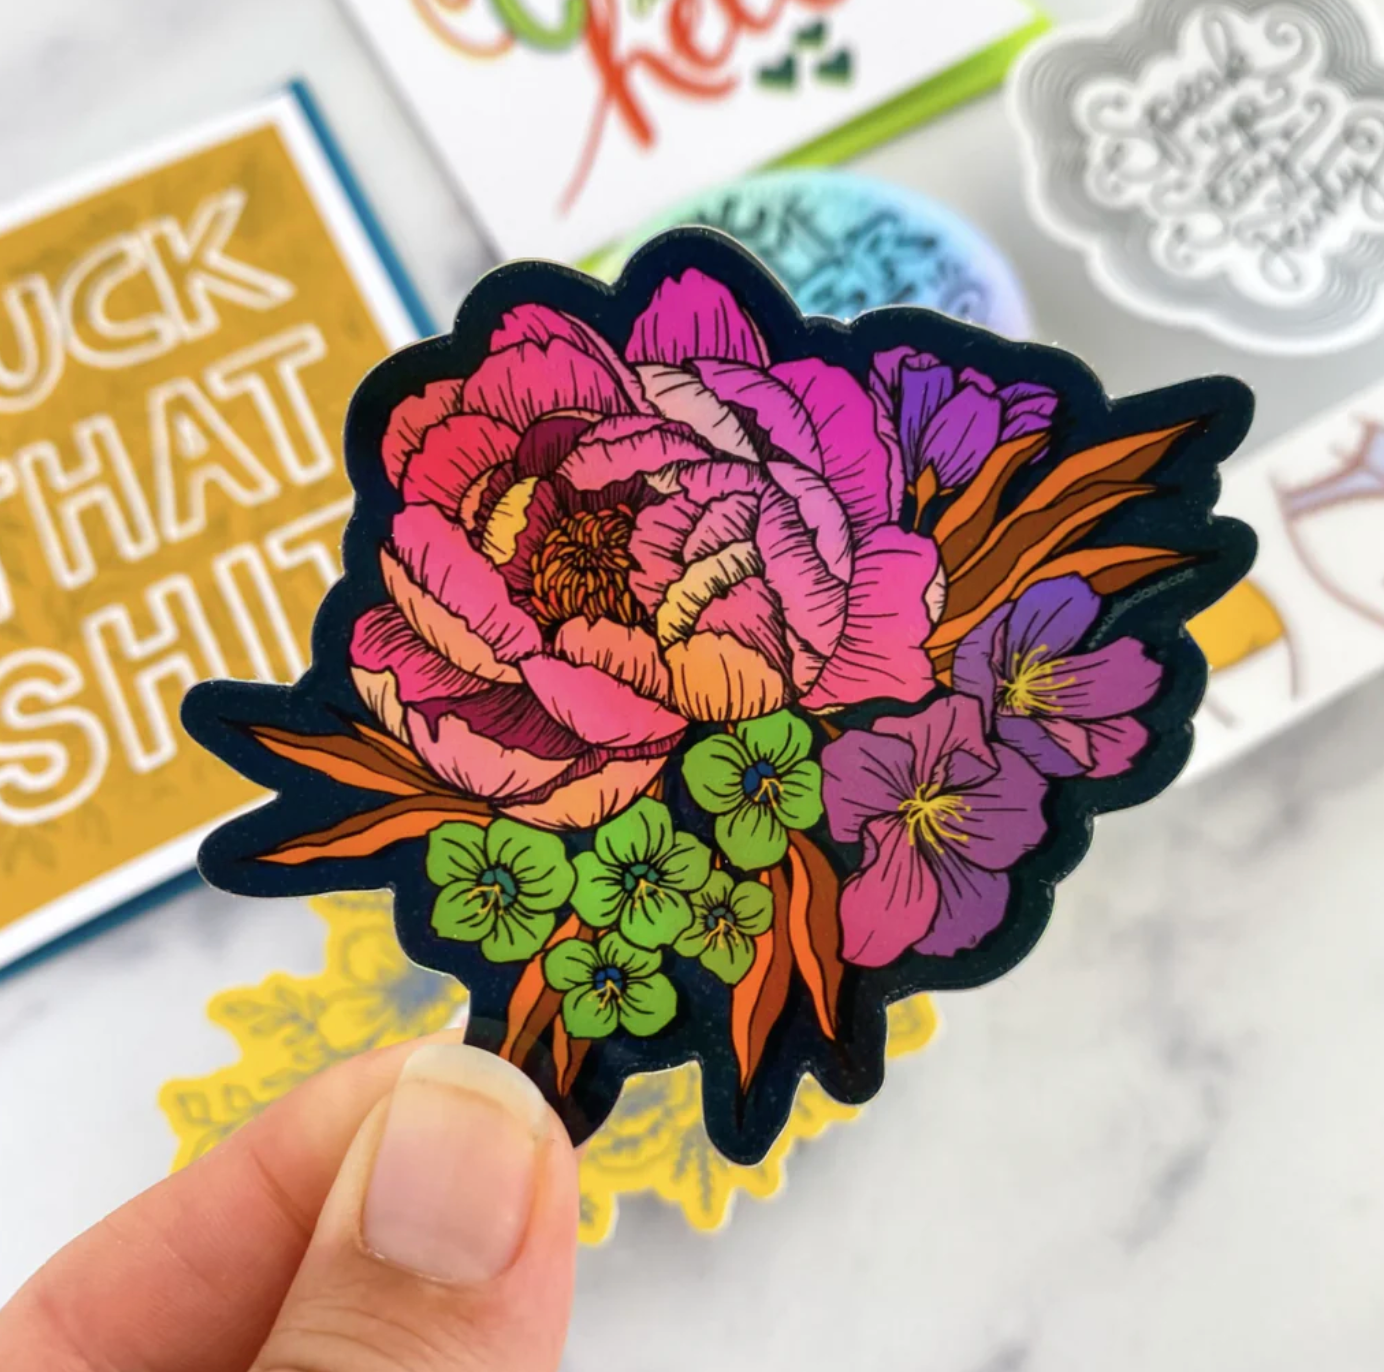 Floral sticker with vibrant colors made by Billie Claire Handmade